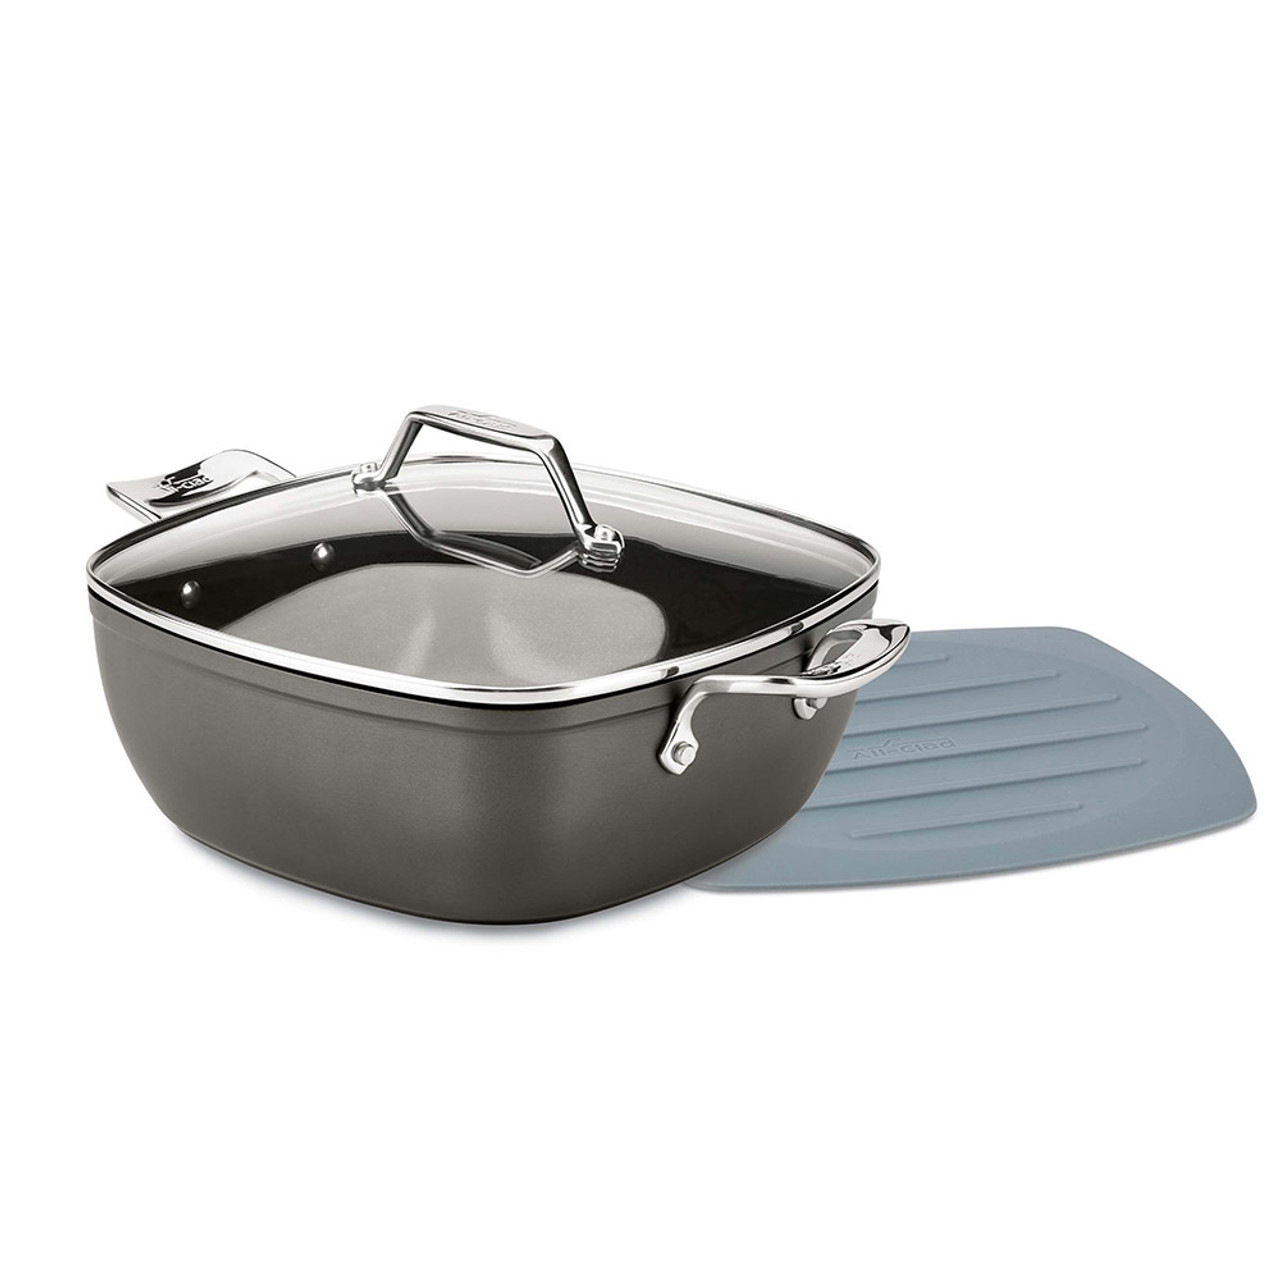 https://cdn11.bigcommerce.com/s-hccytny0od/images/stencil/1280x1280/products/3577/12766/all-clad-essentials-nonstick-simmer-stew-pan-trivet__58042.1601385188.jpg?c=2?imbypass=on